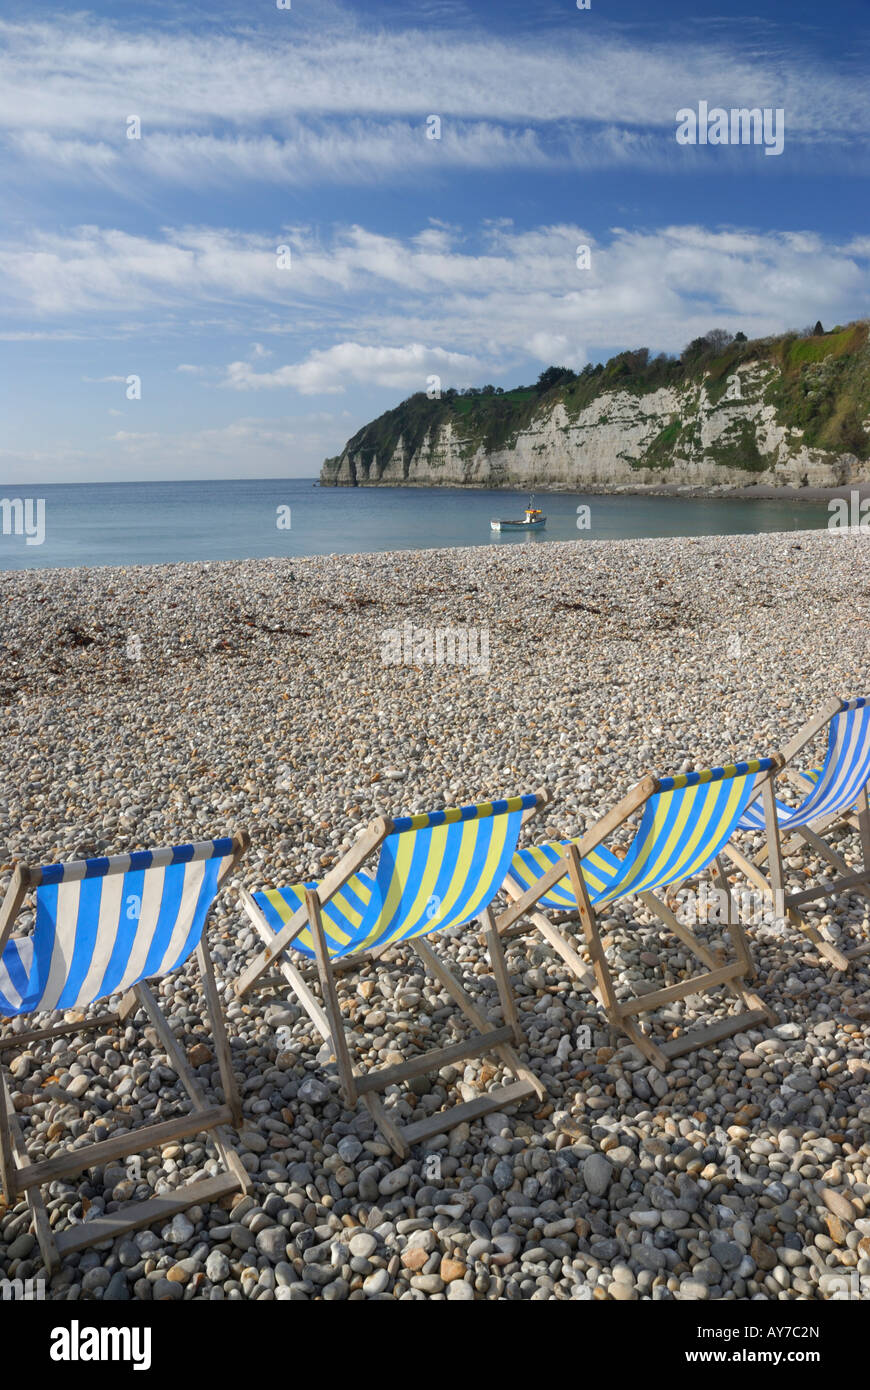 View of Beer beach in Devon, UK, with blue deckchairs in the foreground and a small boat in the sea Stock Photo